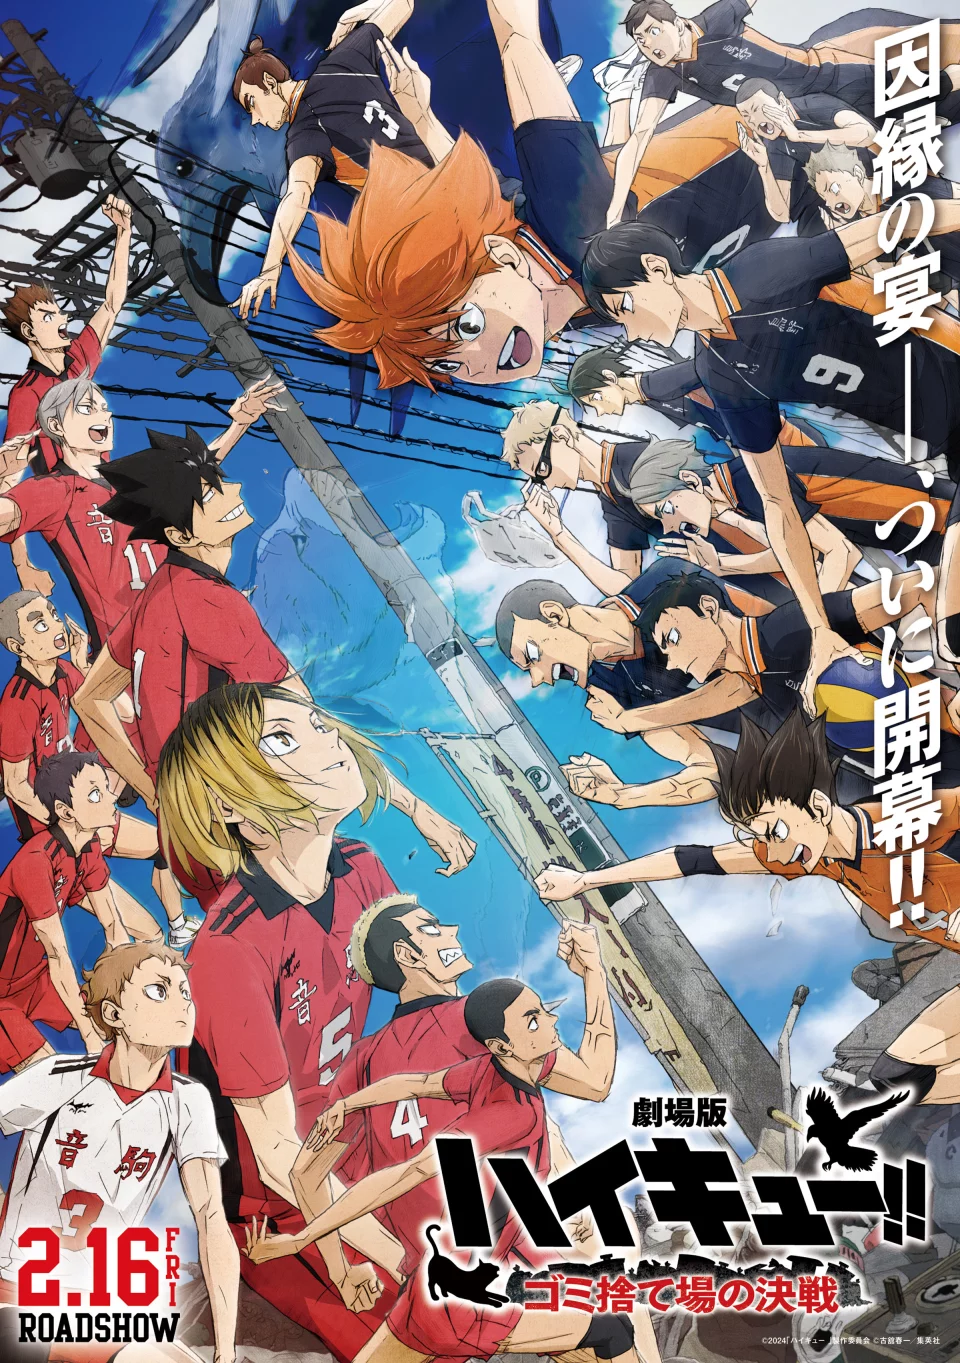 Haikyuu!! has overwhelming success with his new film